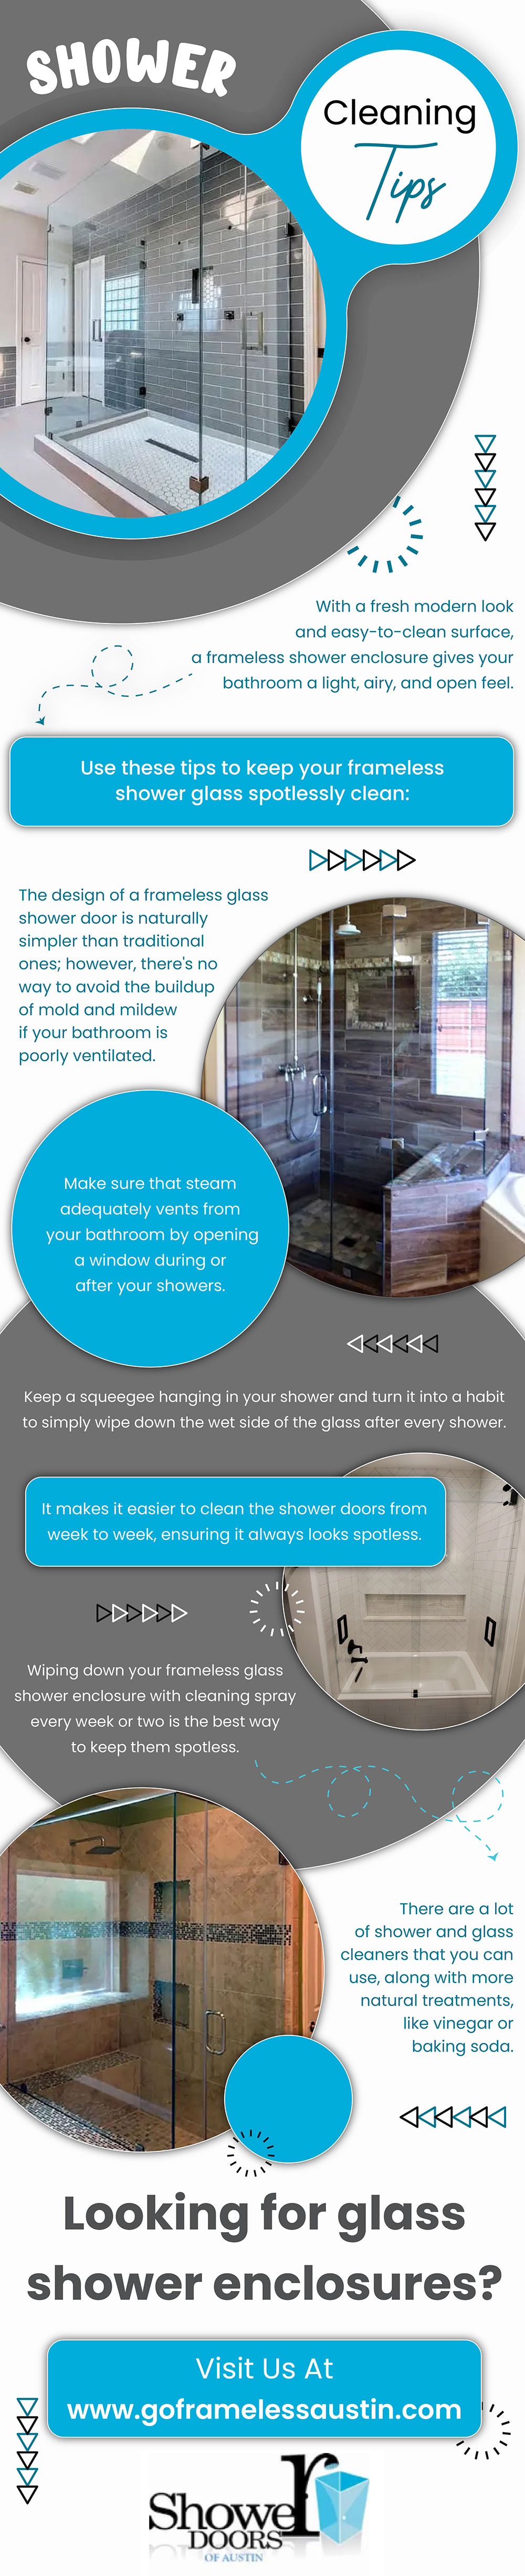 Shower Cleaning Tips